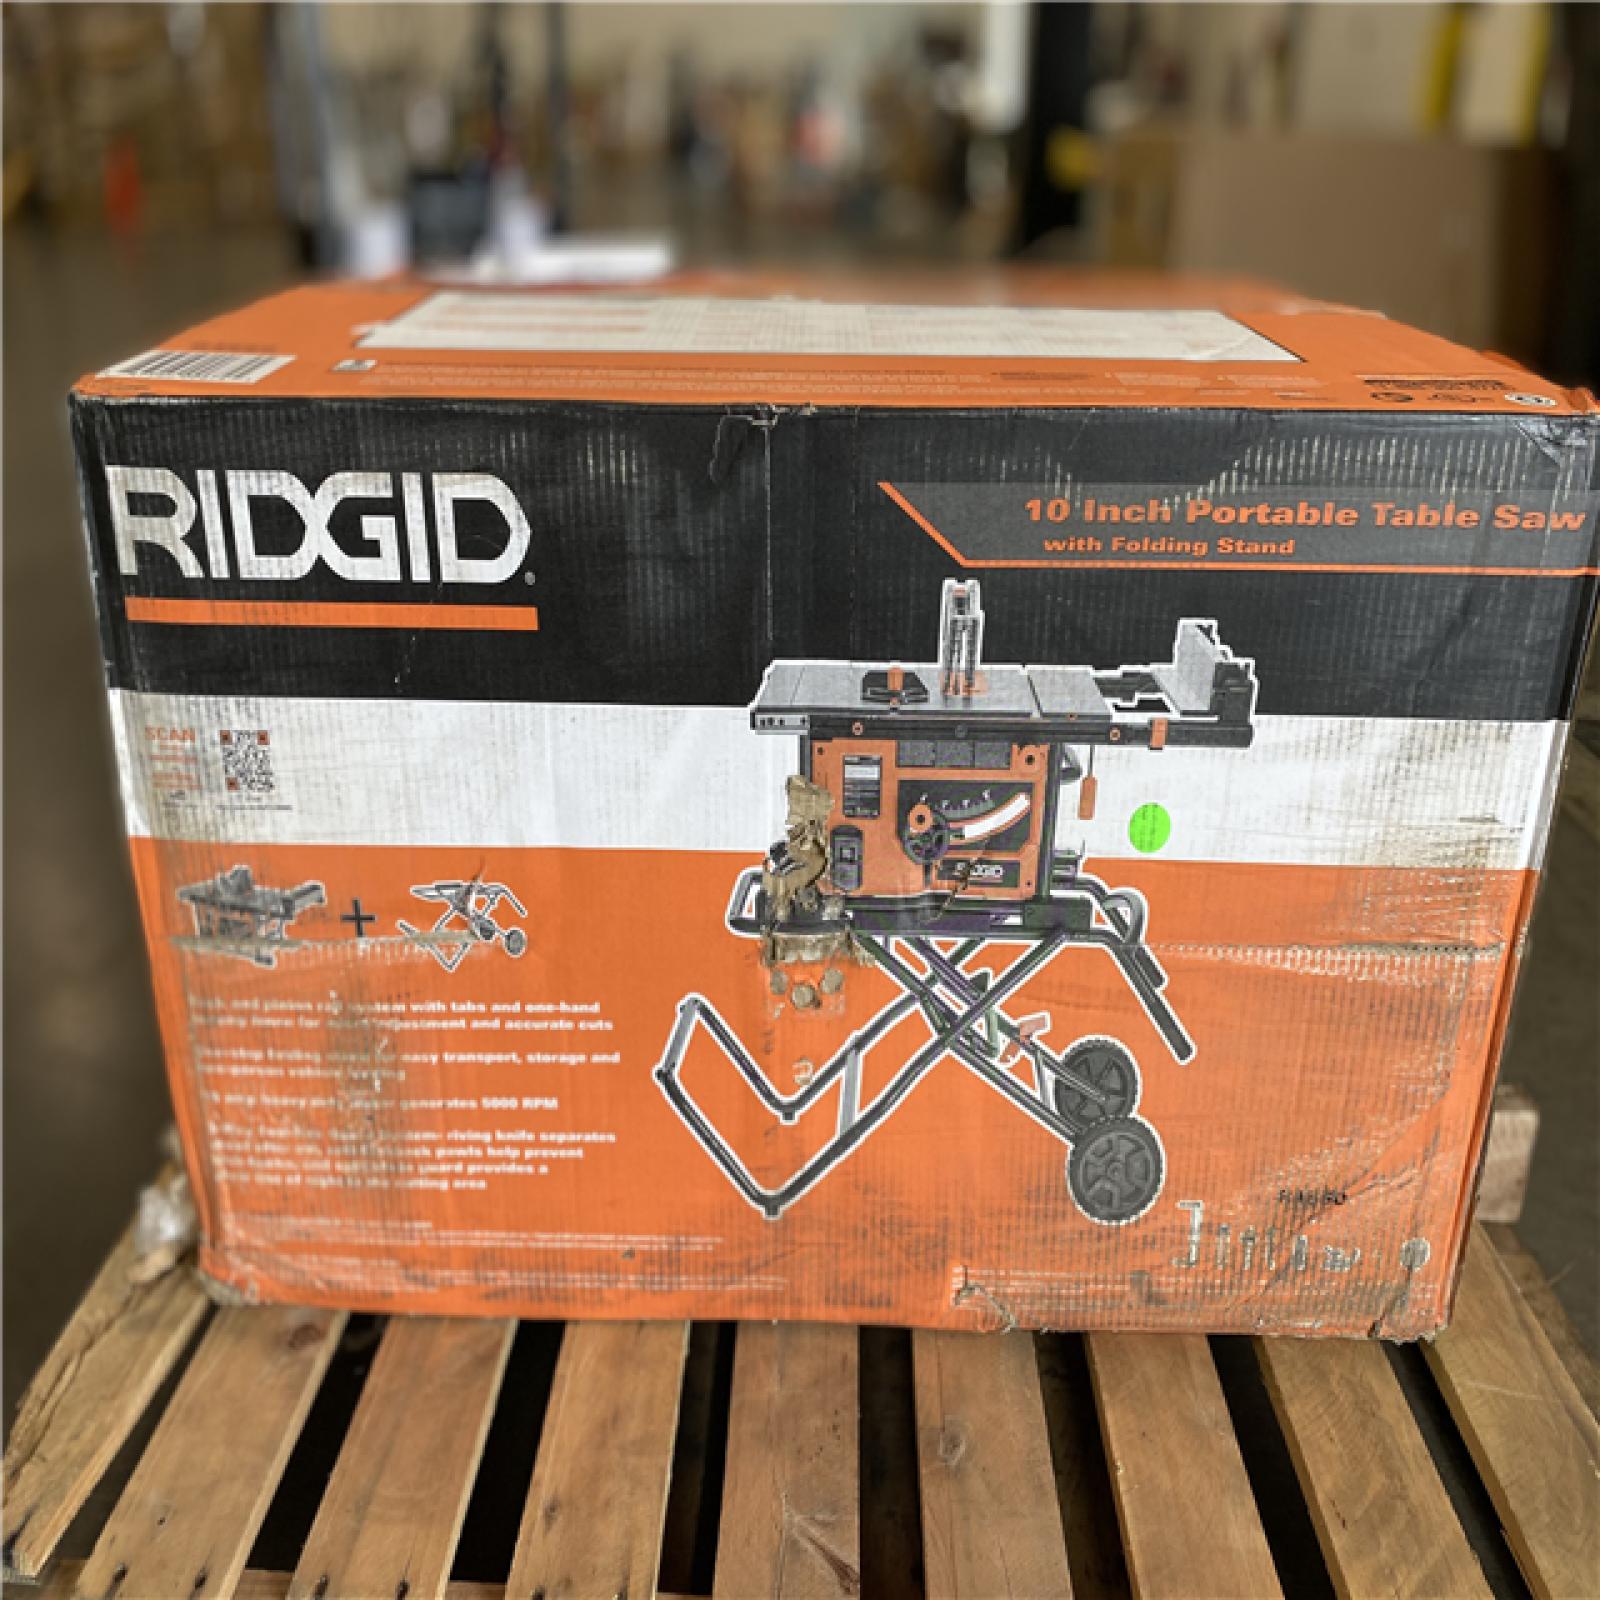 DALLAS LOCATION - NEW! RIDGID 10 in. Table Saw with Folding Stand